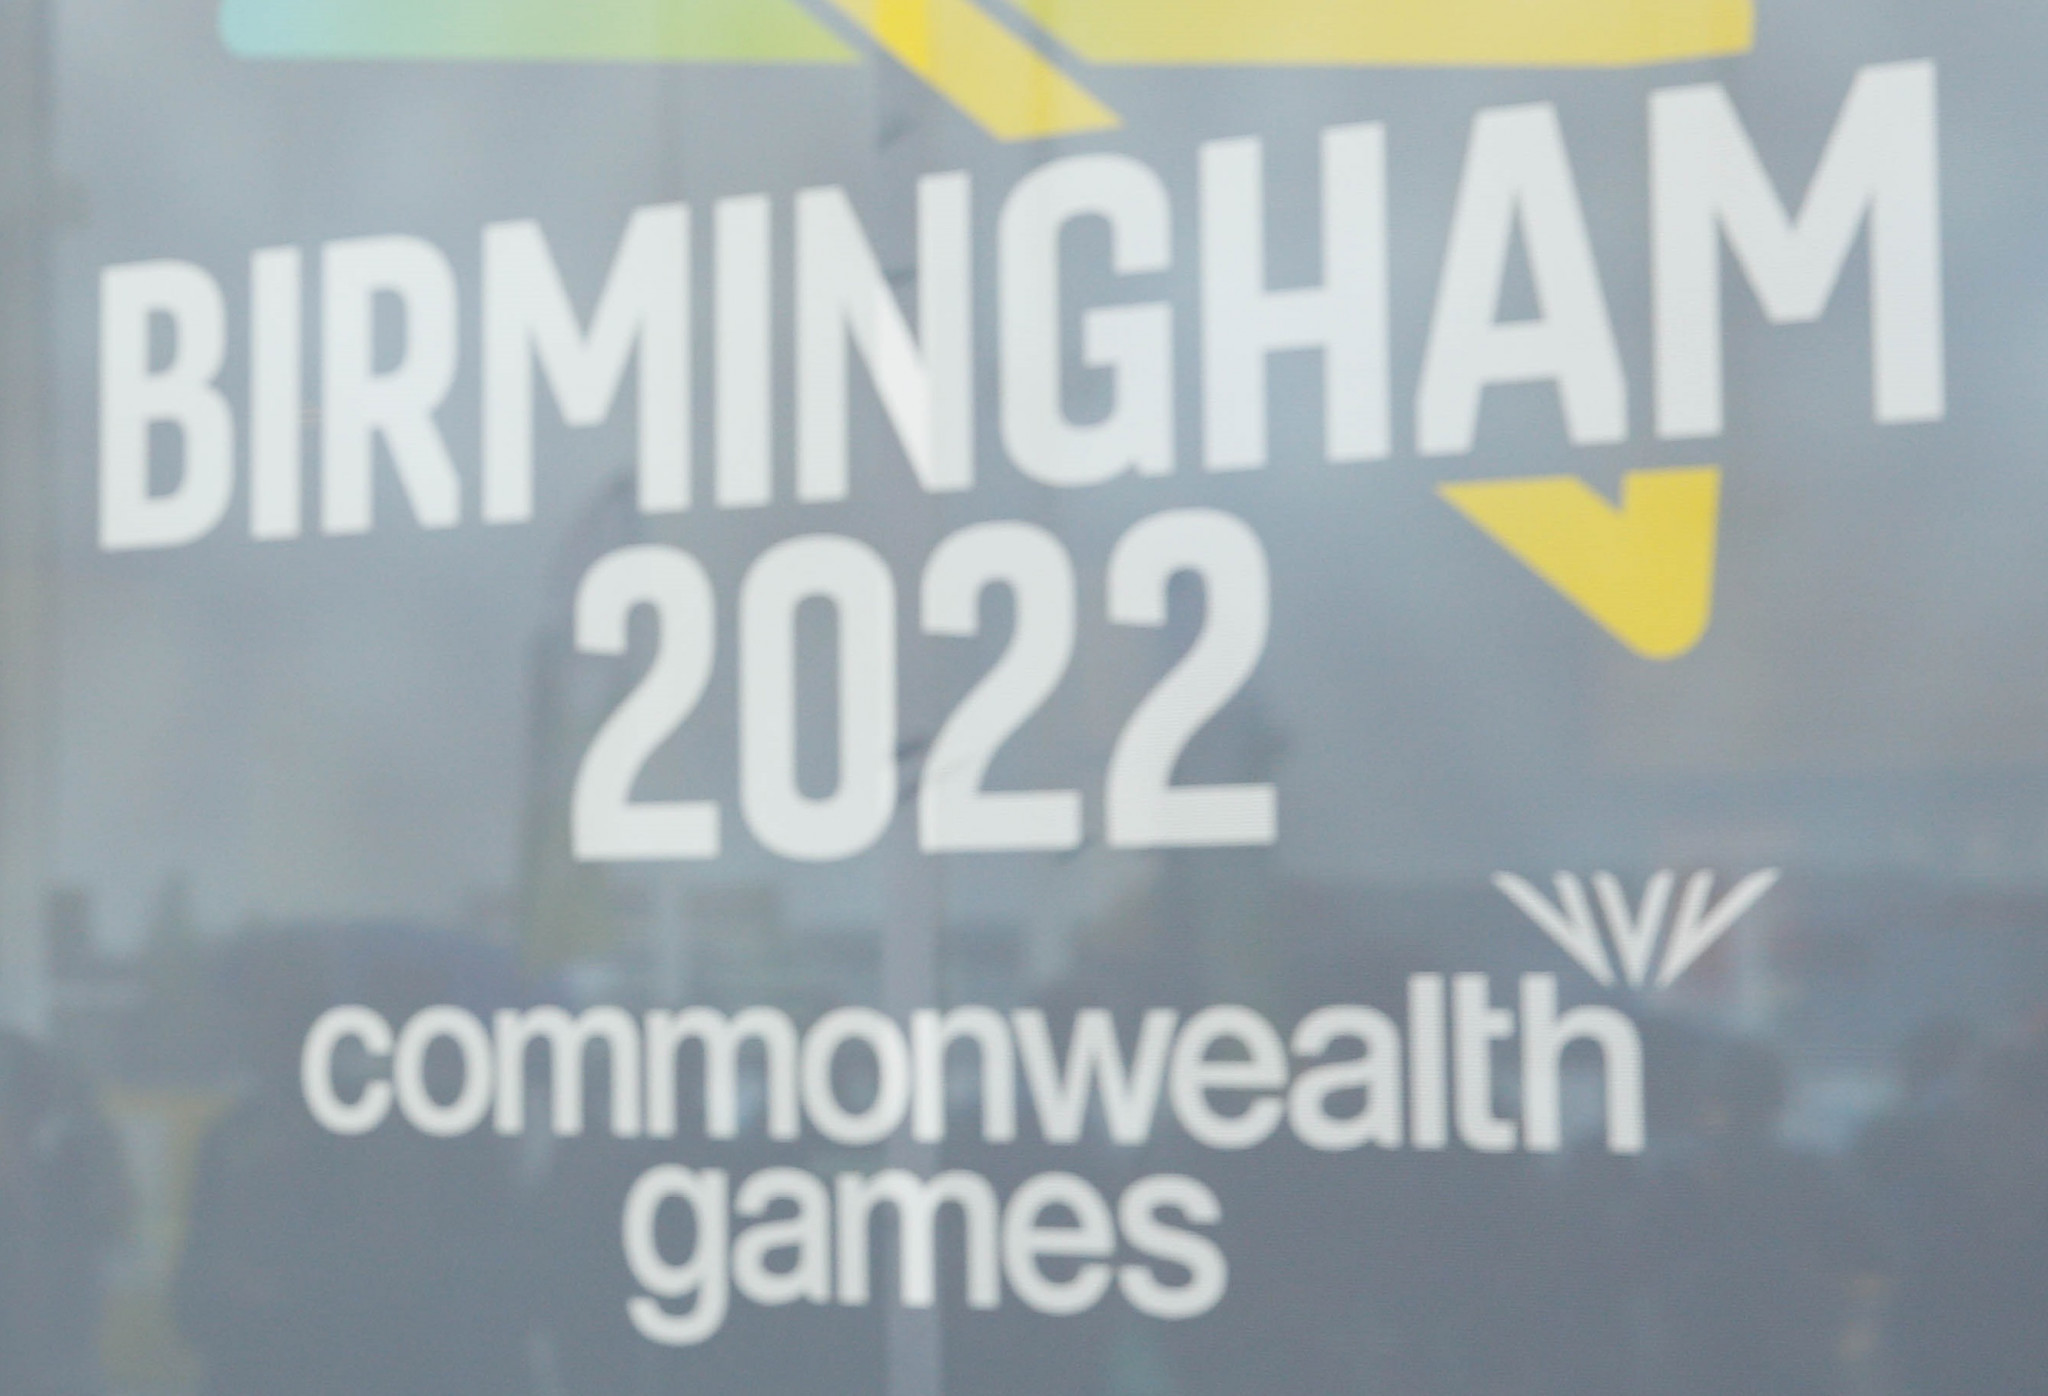 Birmingham 2022 says improvements made as group takes aim at diversity of workforce